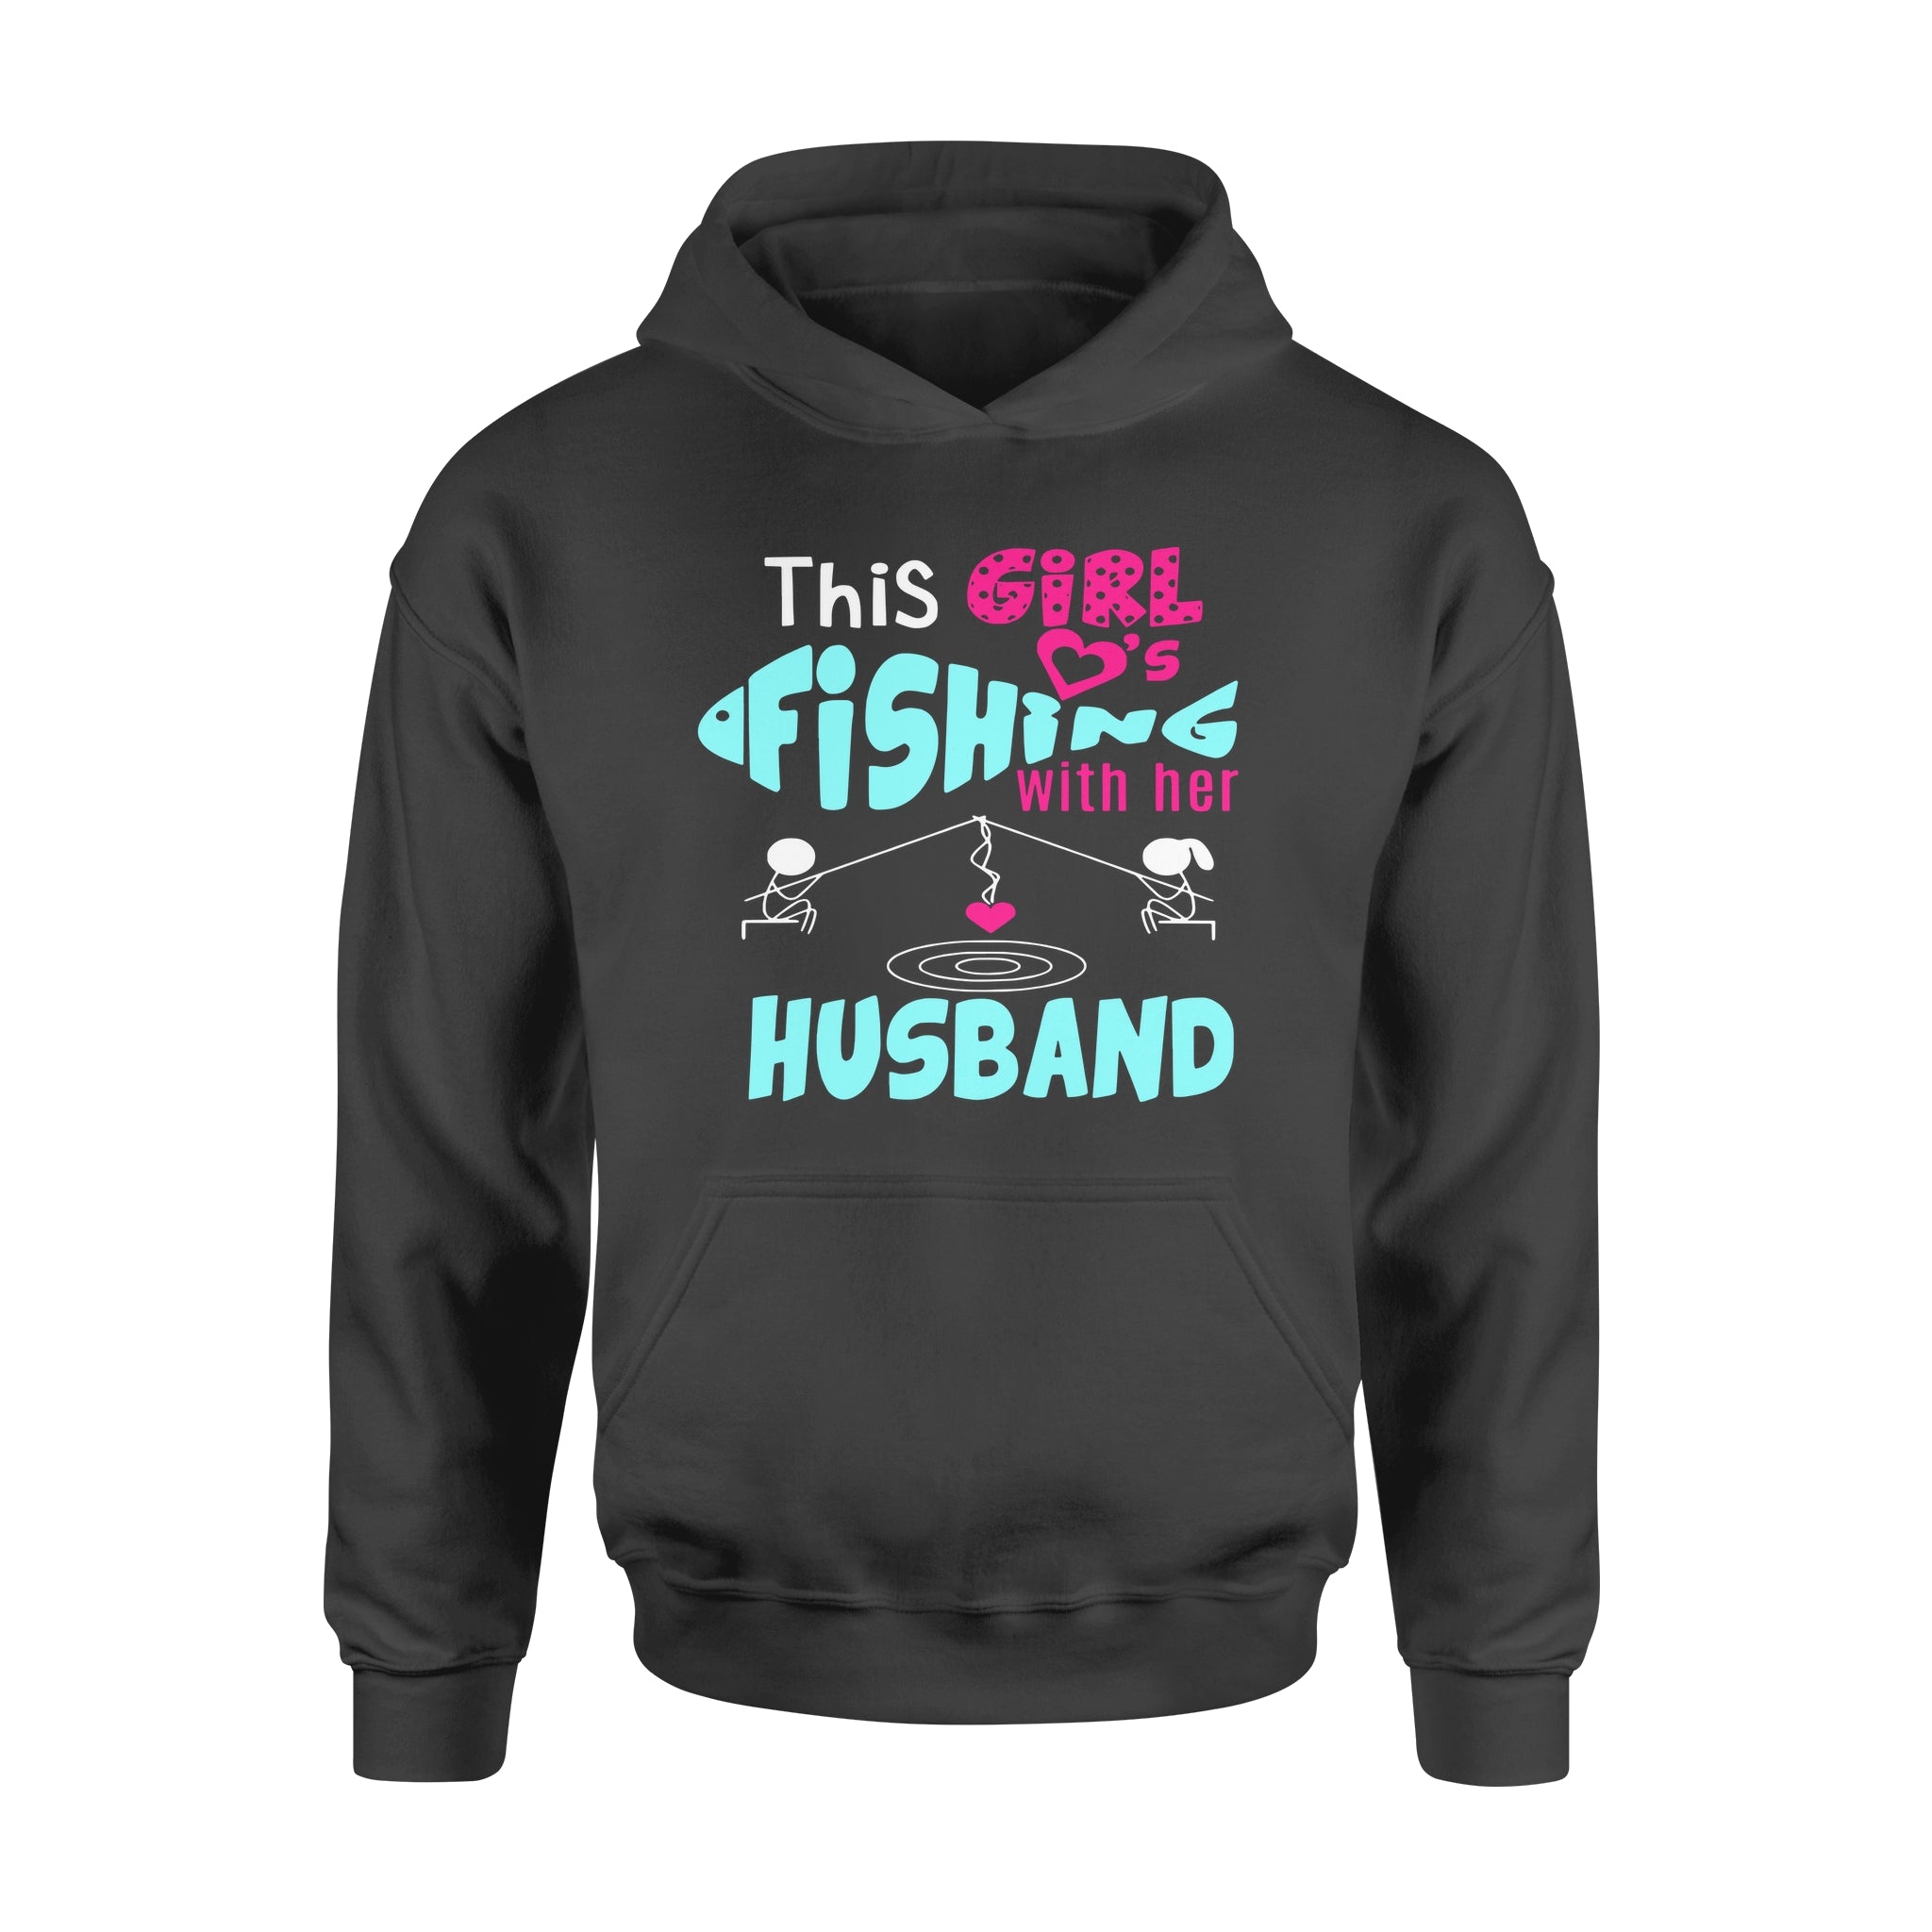 Fishing Wife Shirt This girl Fishing with her Husband Hoodie - FSD1362D07